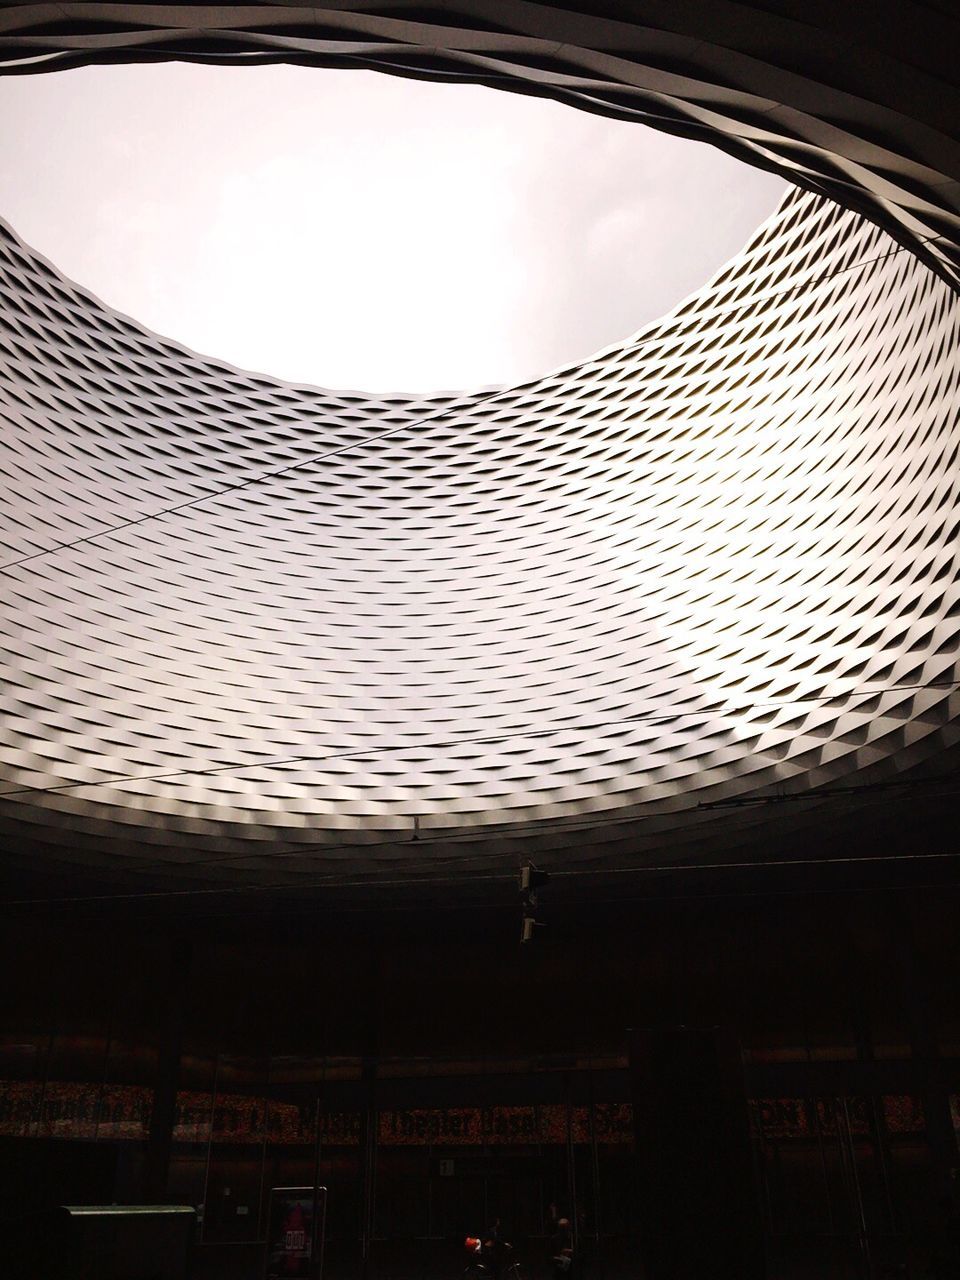 Low angle view of circle open roof of modern building